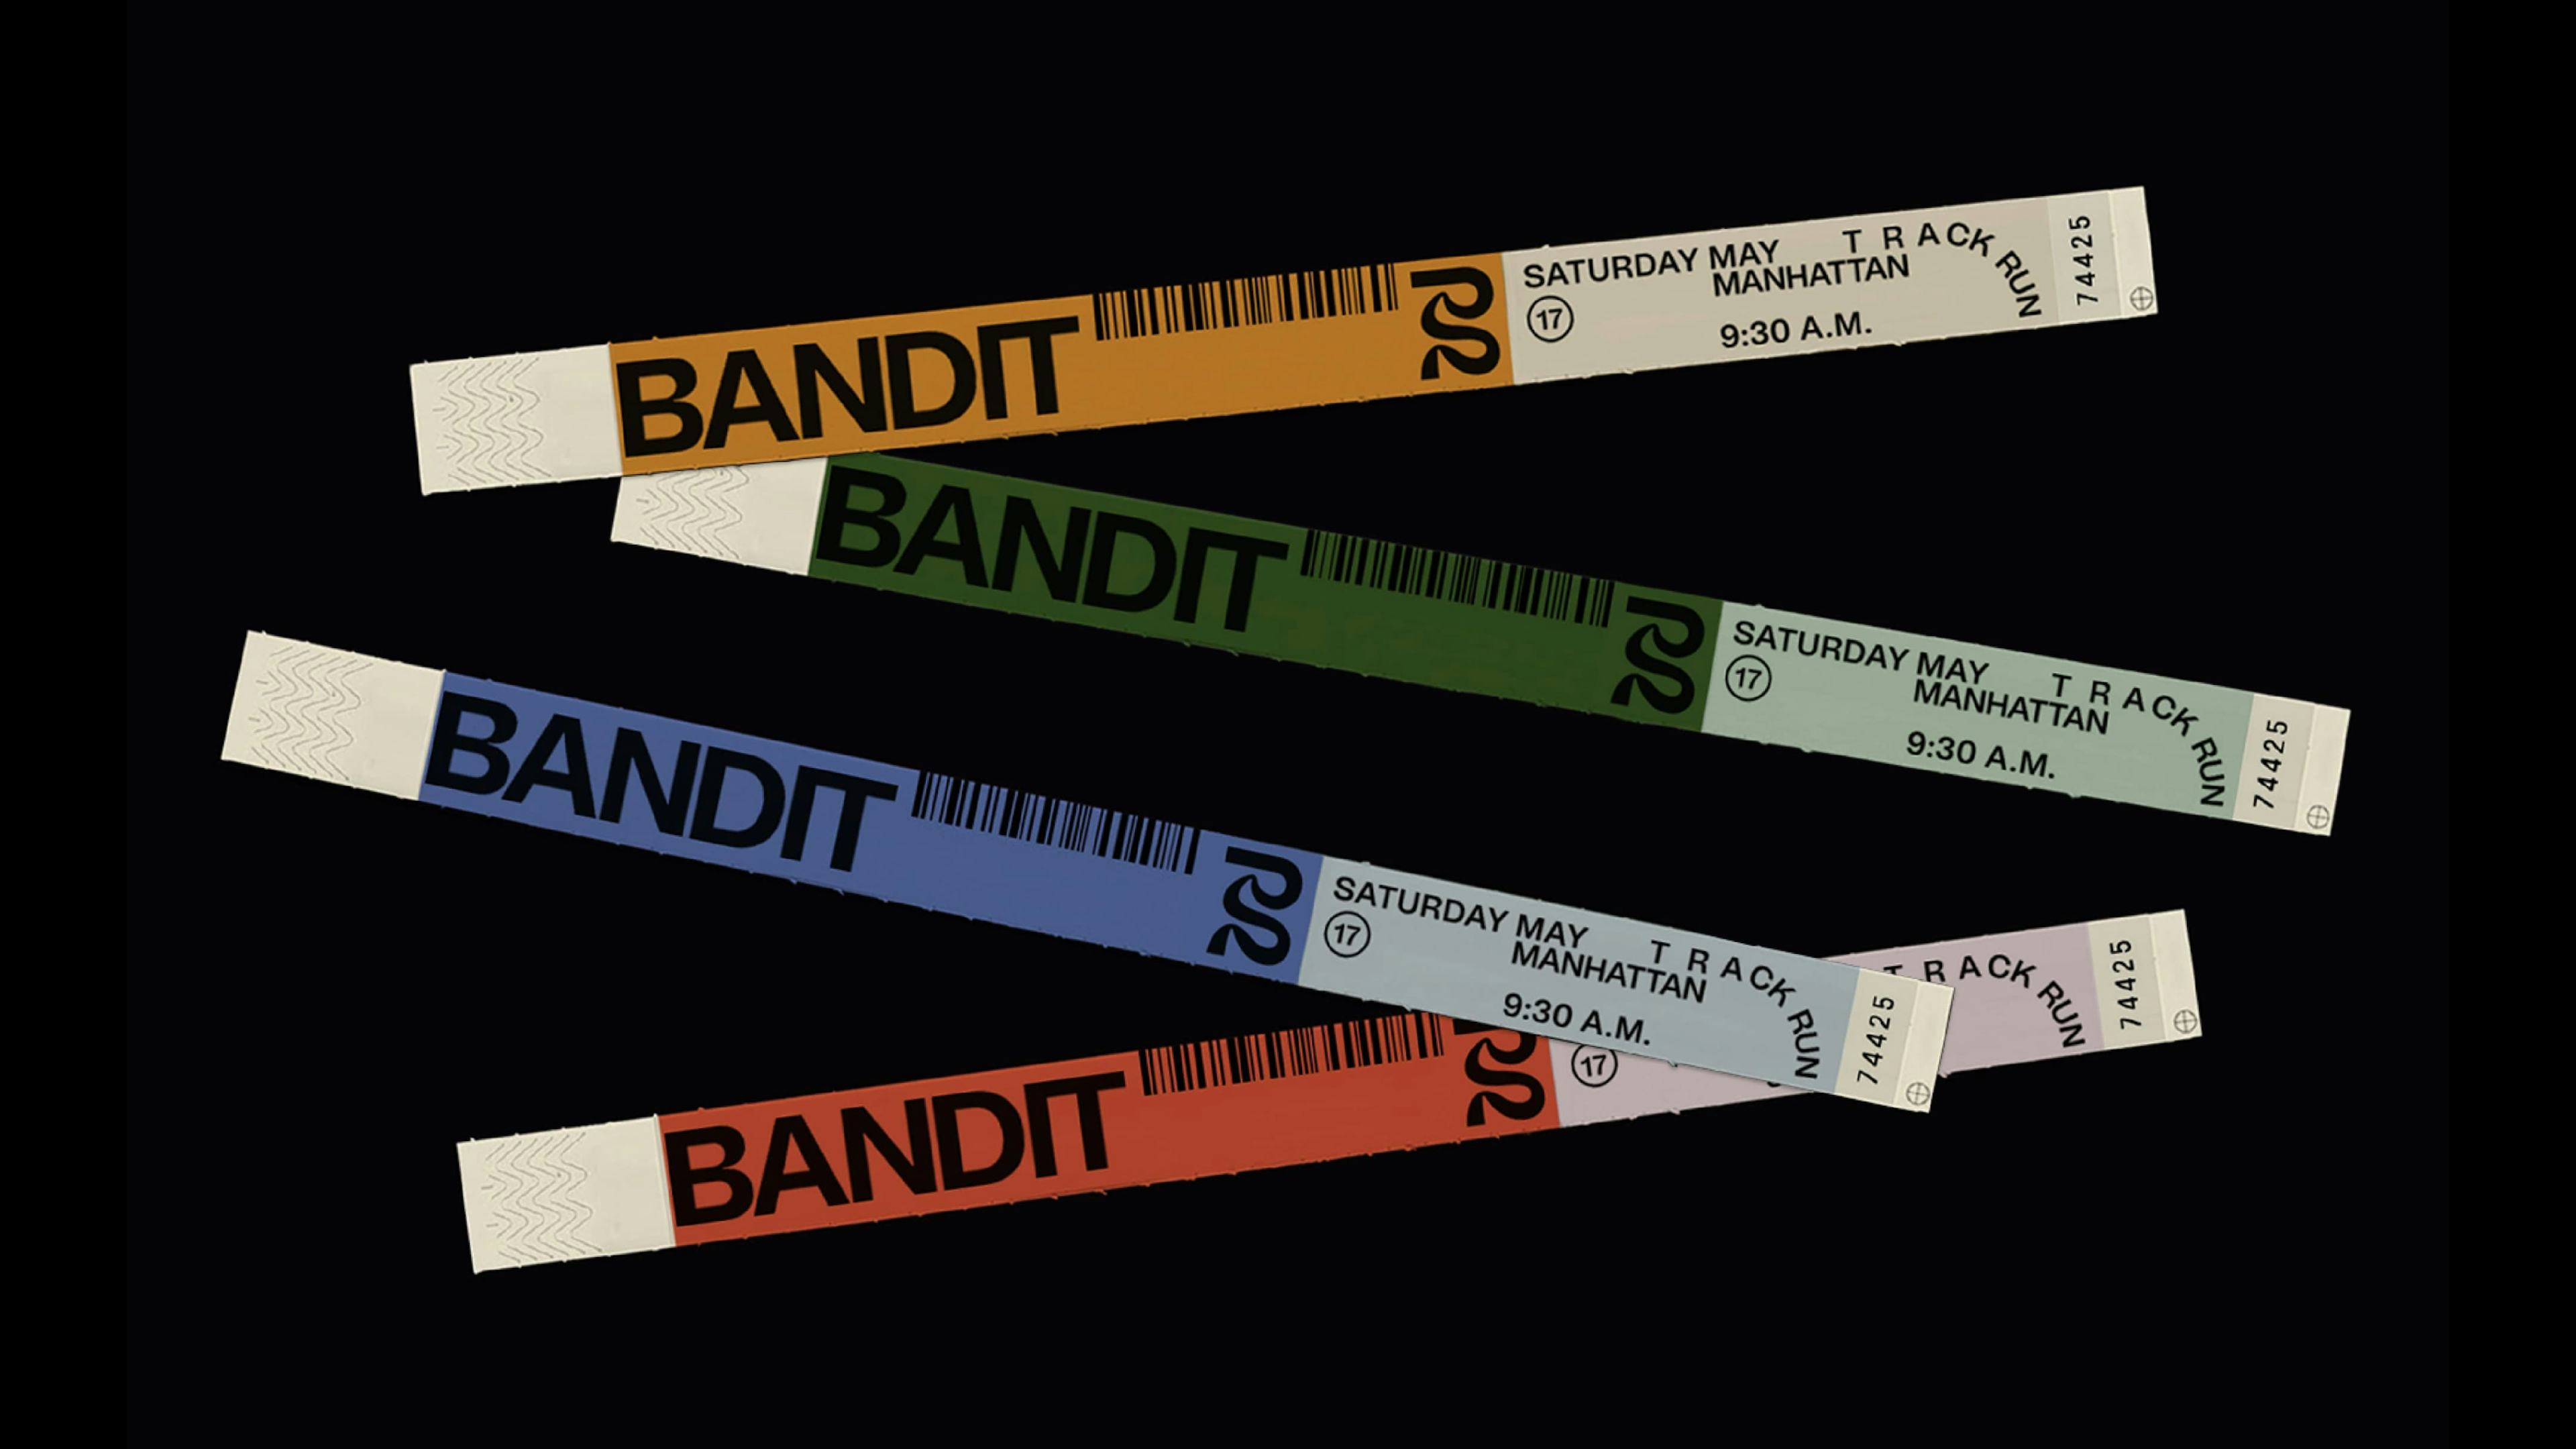 Brand identity, strategy, responsive design, and development for Bandit, an NYC born running company, for runners by runners.